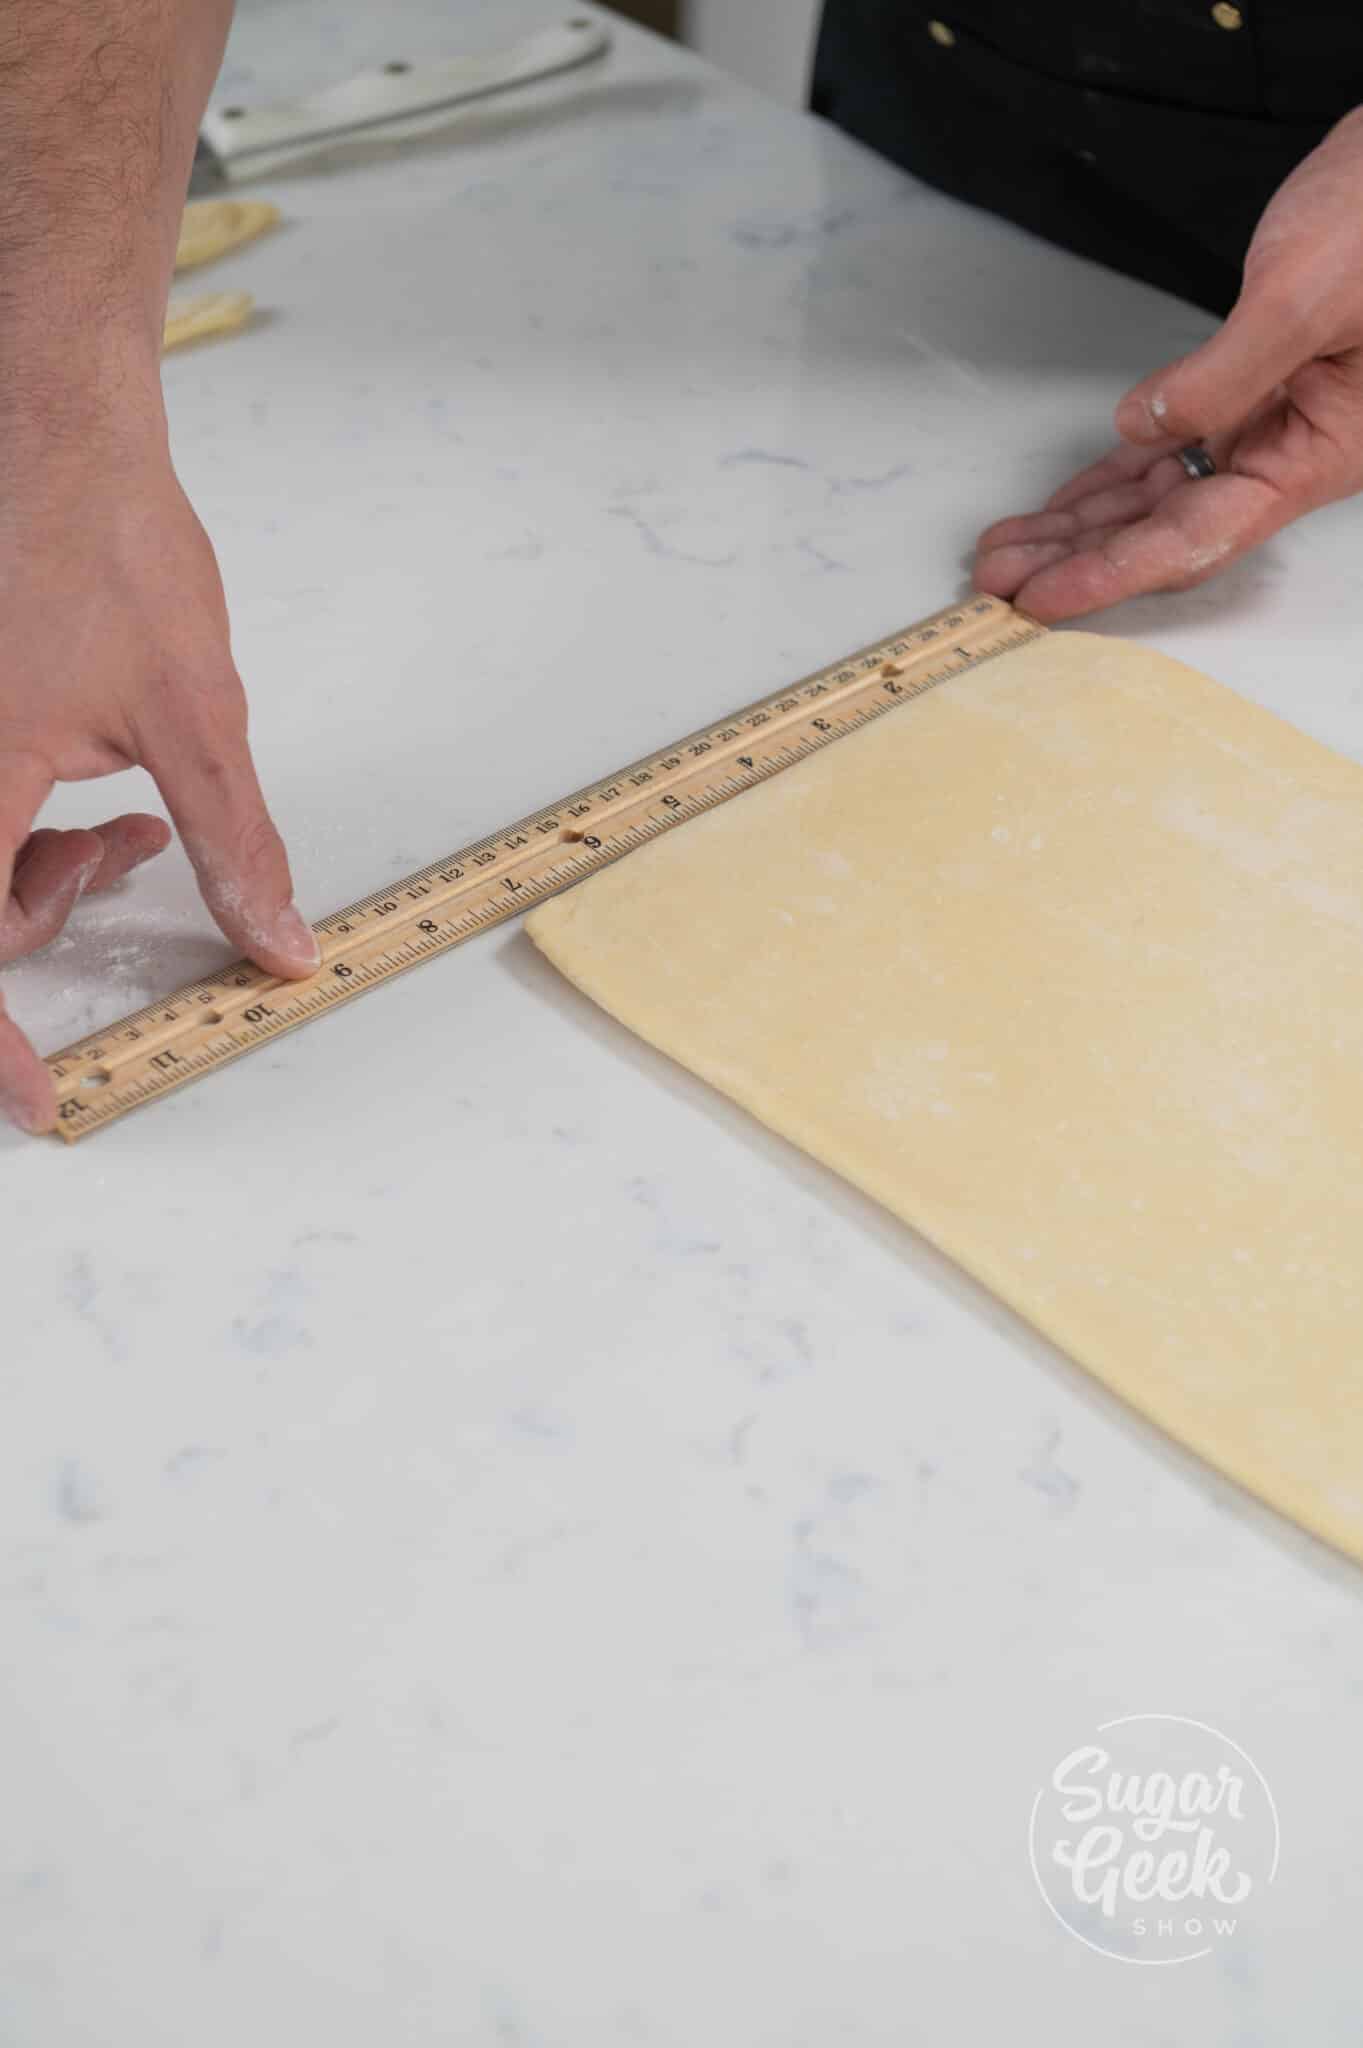 hand holding ruler next to dough.